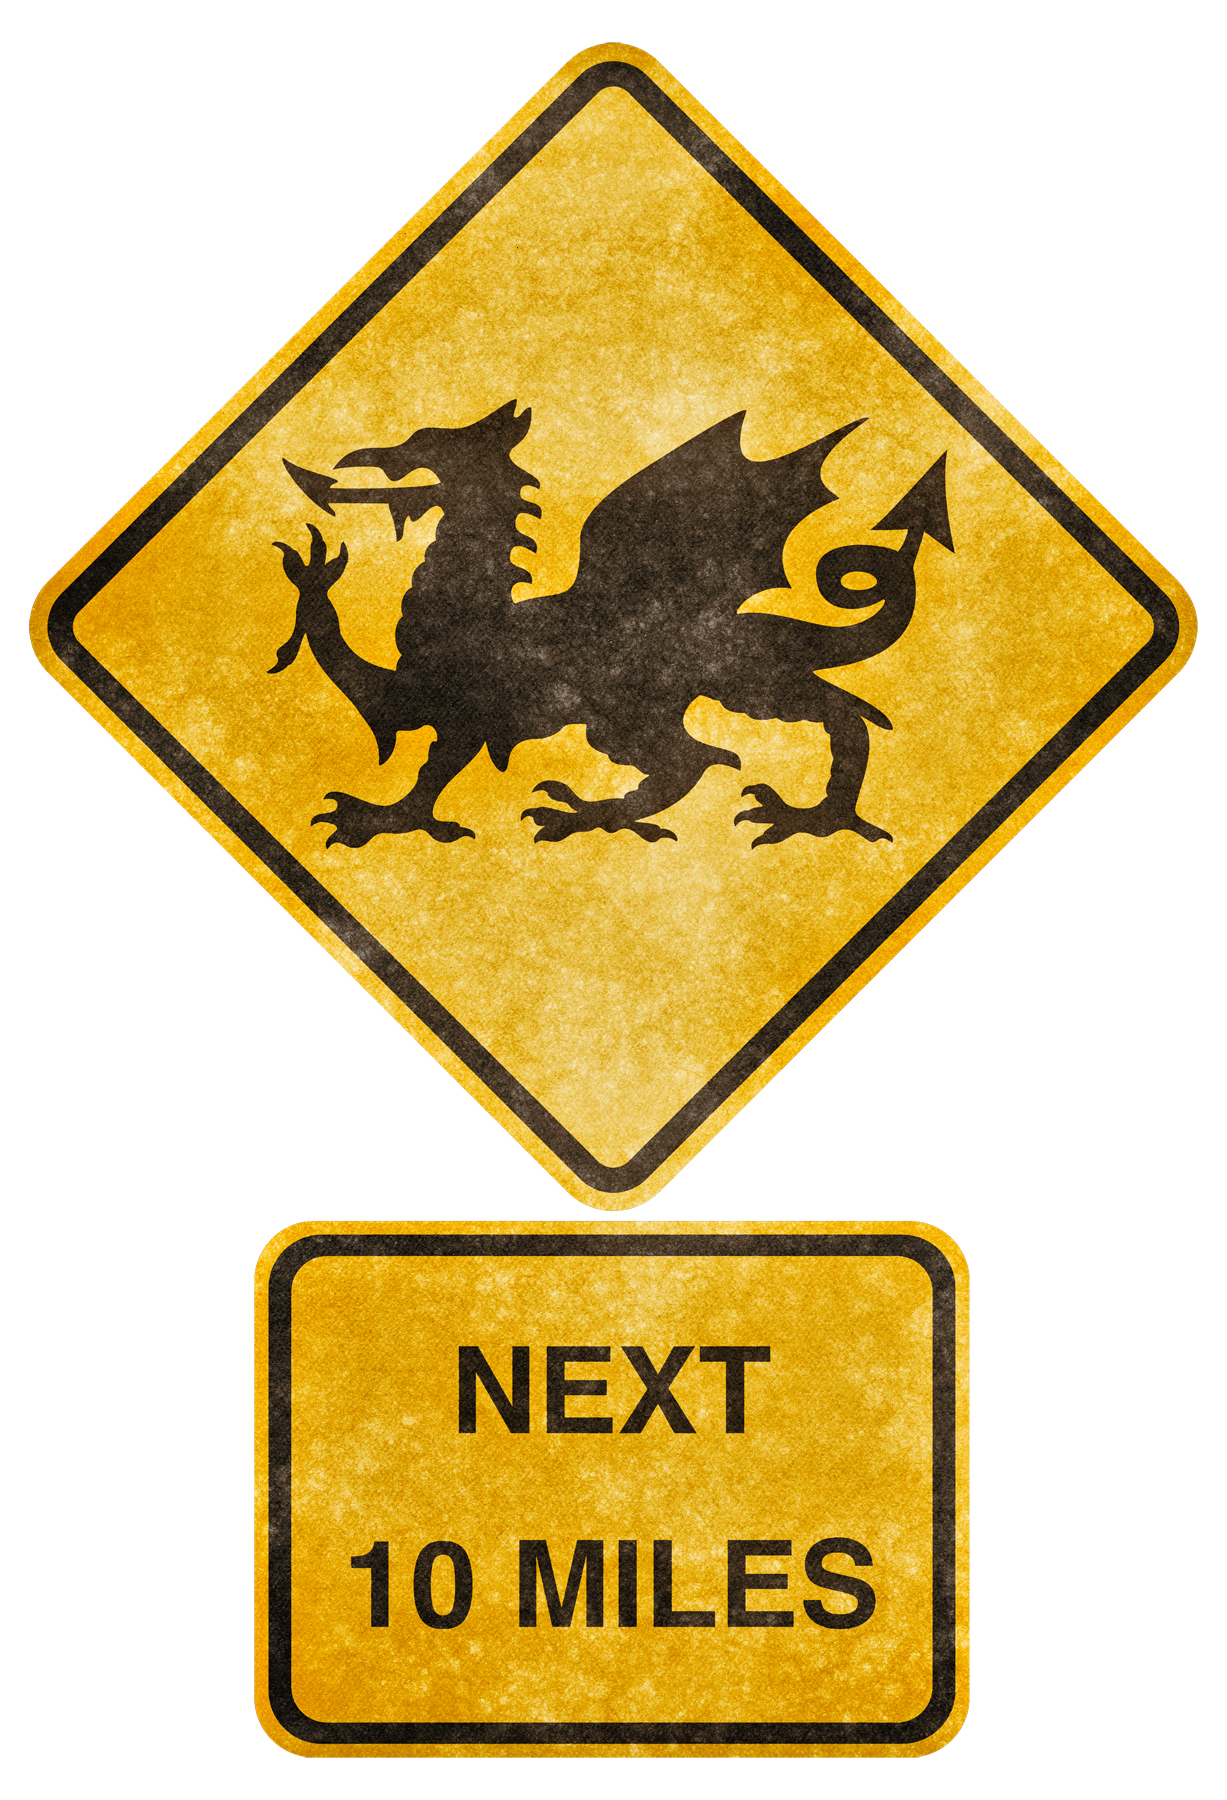 Crossing road grunge sign - welsh dragon photo